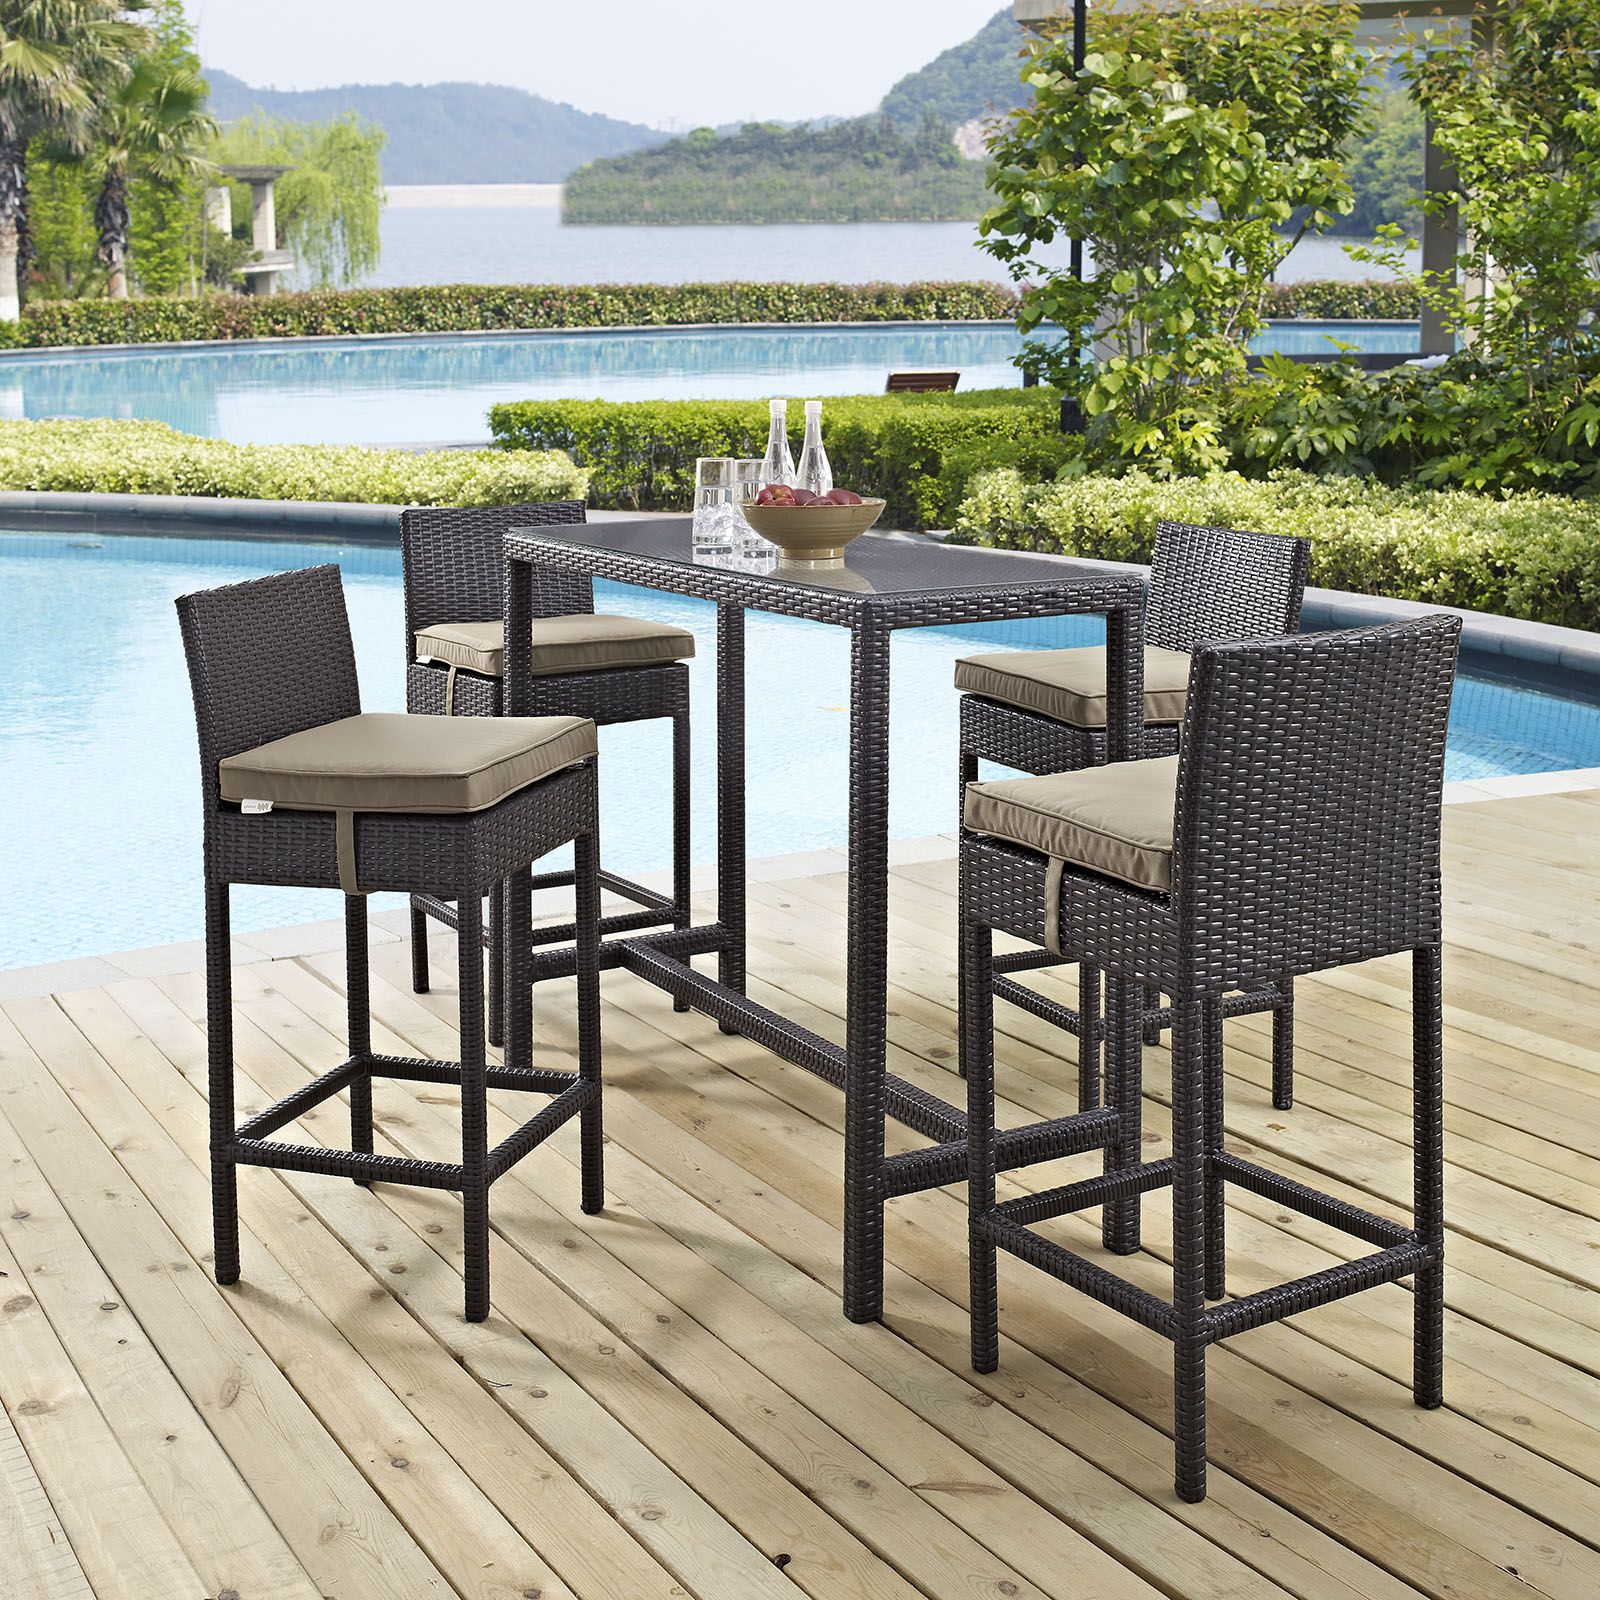 Modway Convene Wicker 5 Piece Rectangular Patio Pub Set – Patio Dining Inside Most Up To Date Large Rectangular Patio Dining Sets (View 8 of 15)